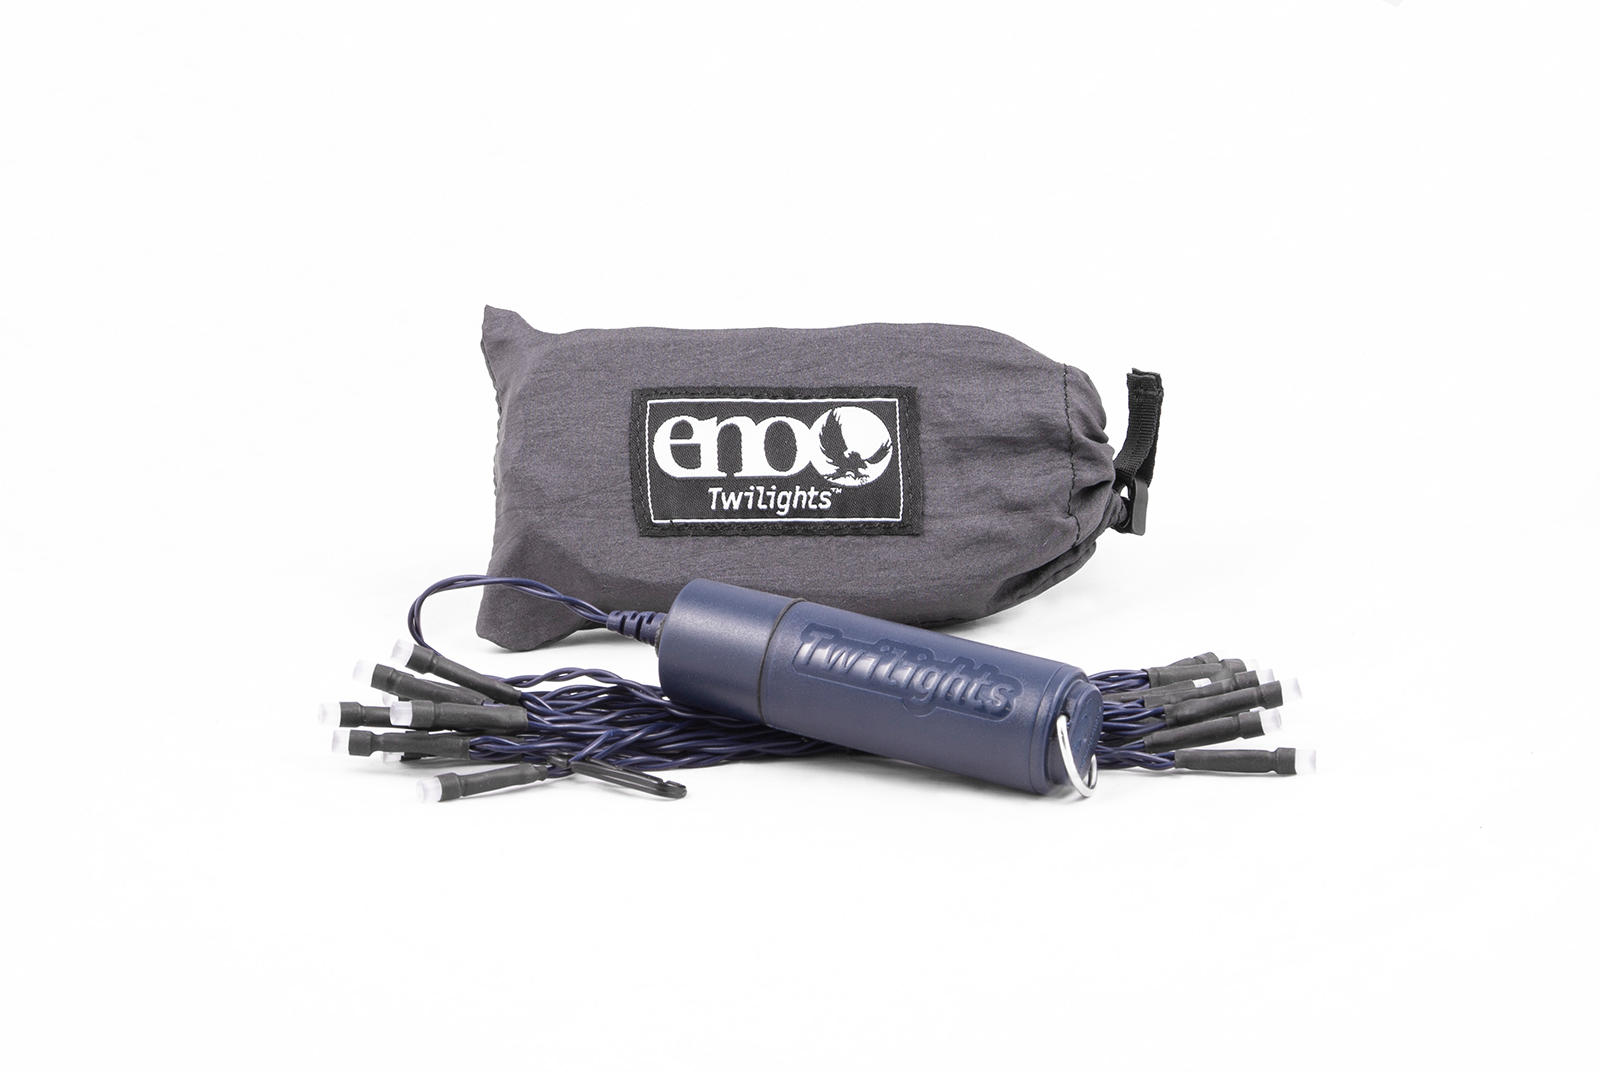 Eagles Nest Outfitters, Inc. Lights & Accessories, ENO Twilights Camp Lights